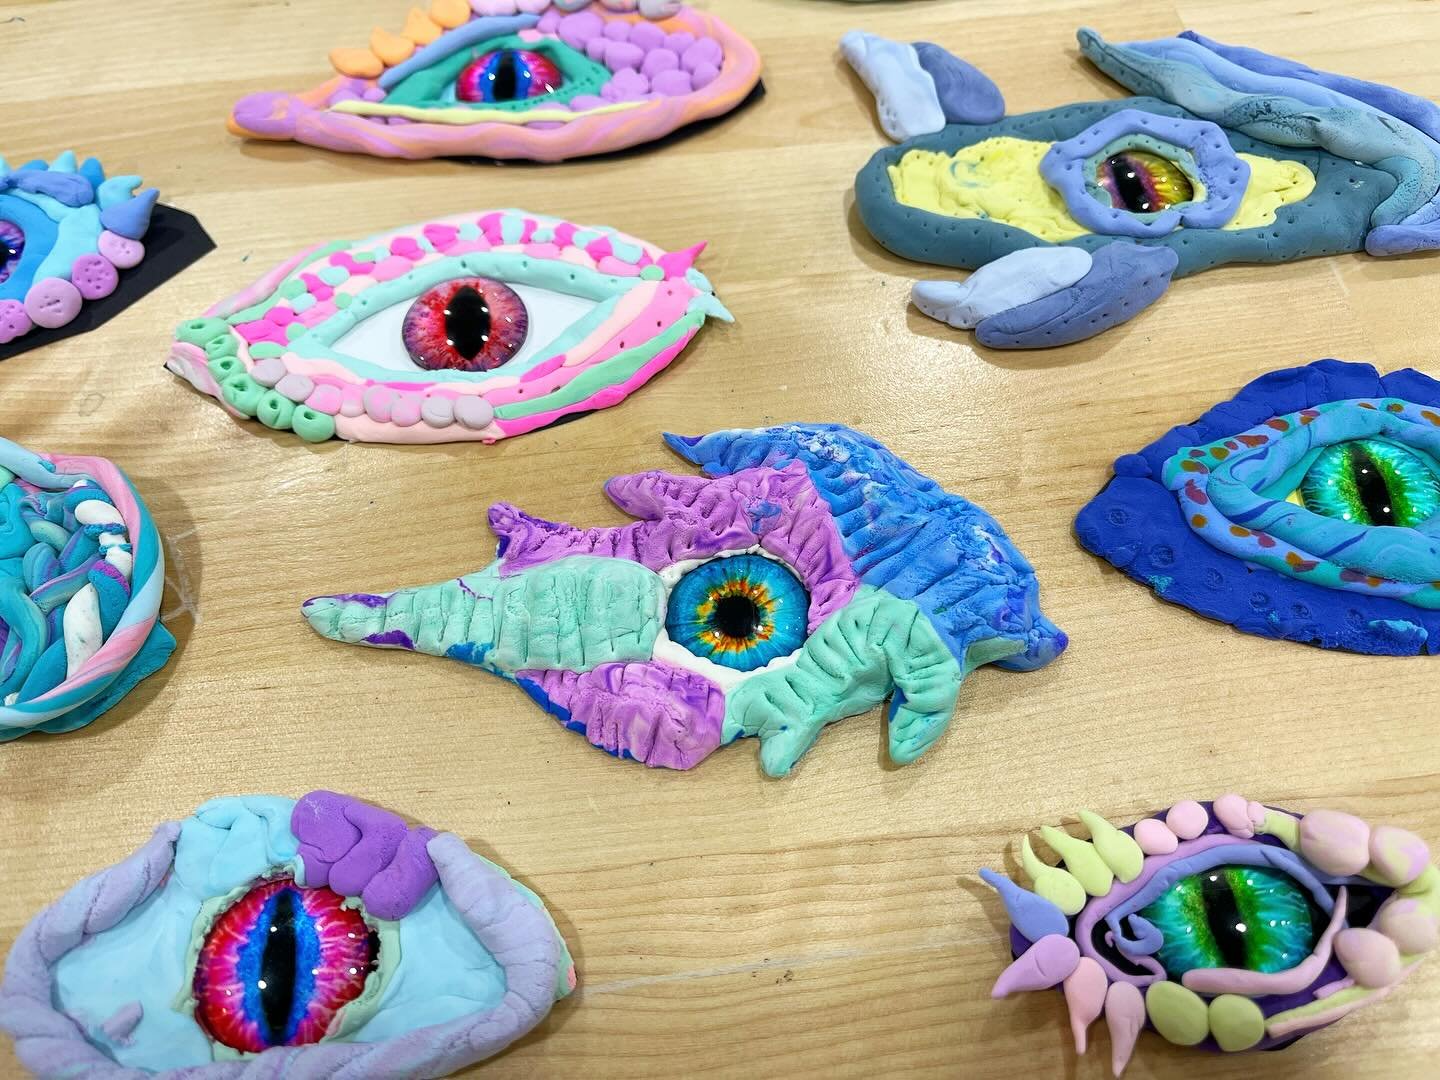 We finally made DRAGON EYES with the flat eye marbles!!! (Order a set online!) Students got to choose between so many different colors when the pack of eye marbles was opened. Students dyed their white air-dry clay different colors with ink, and crea